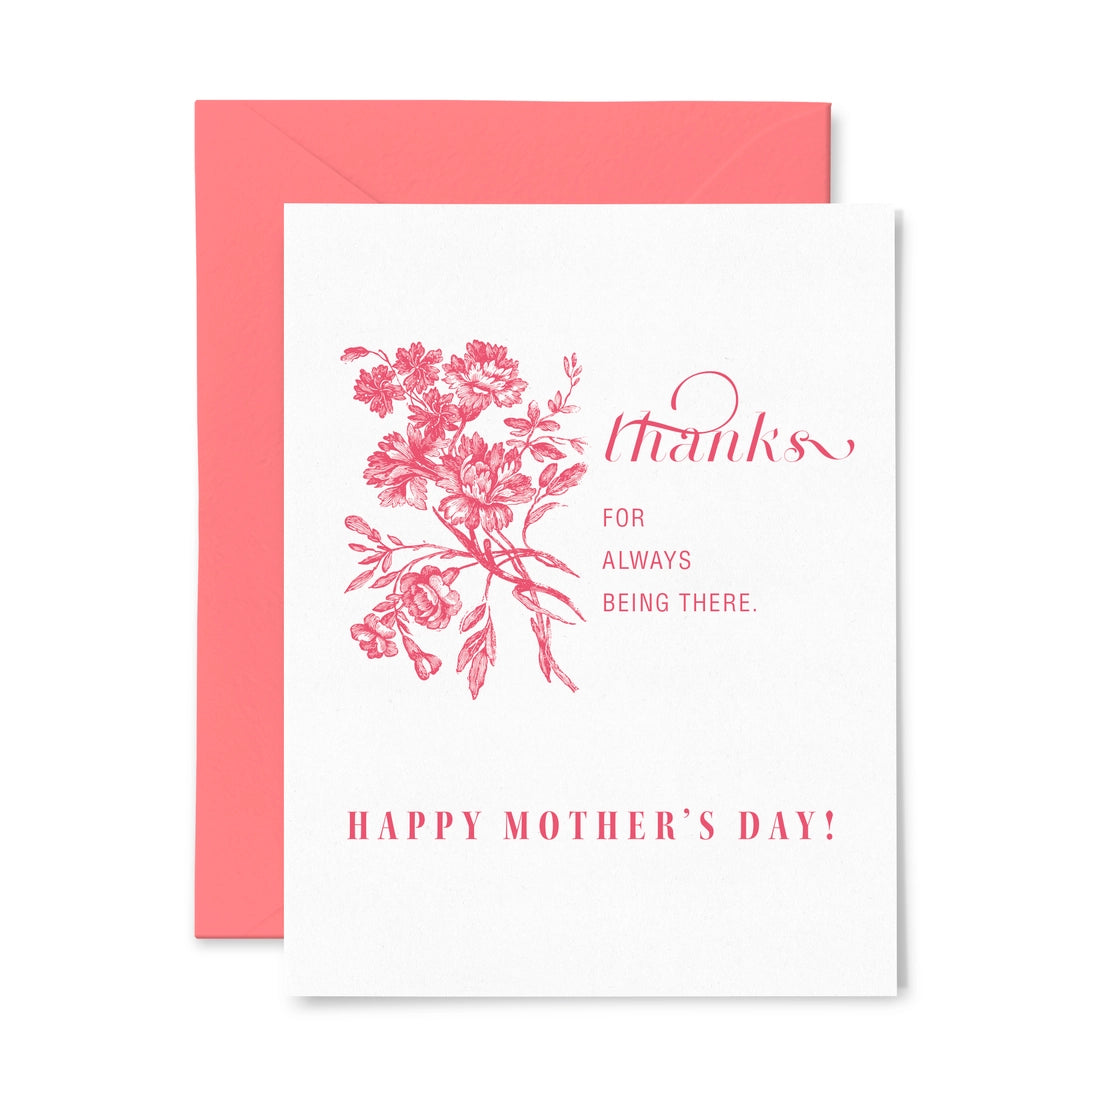 Being There Mom Card by Color Box Design & Letterpress